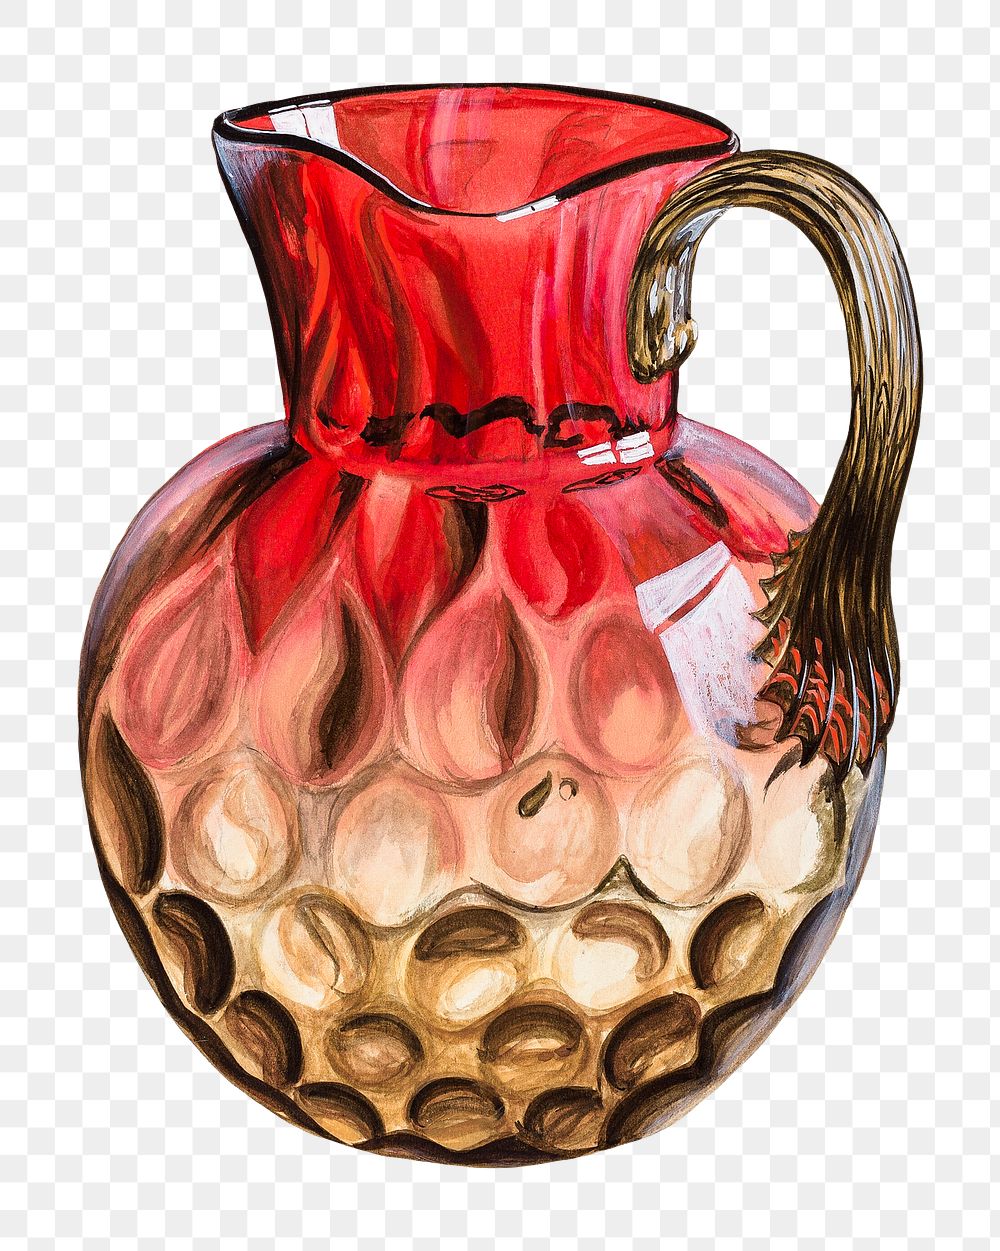 Red pitcher png on transparent background, remixed by rawpixel